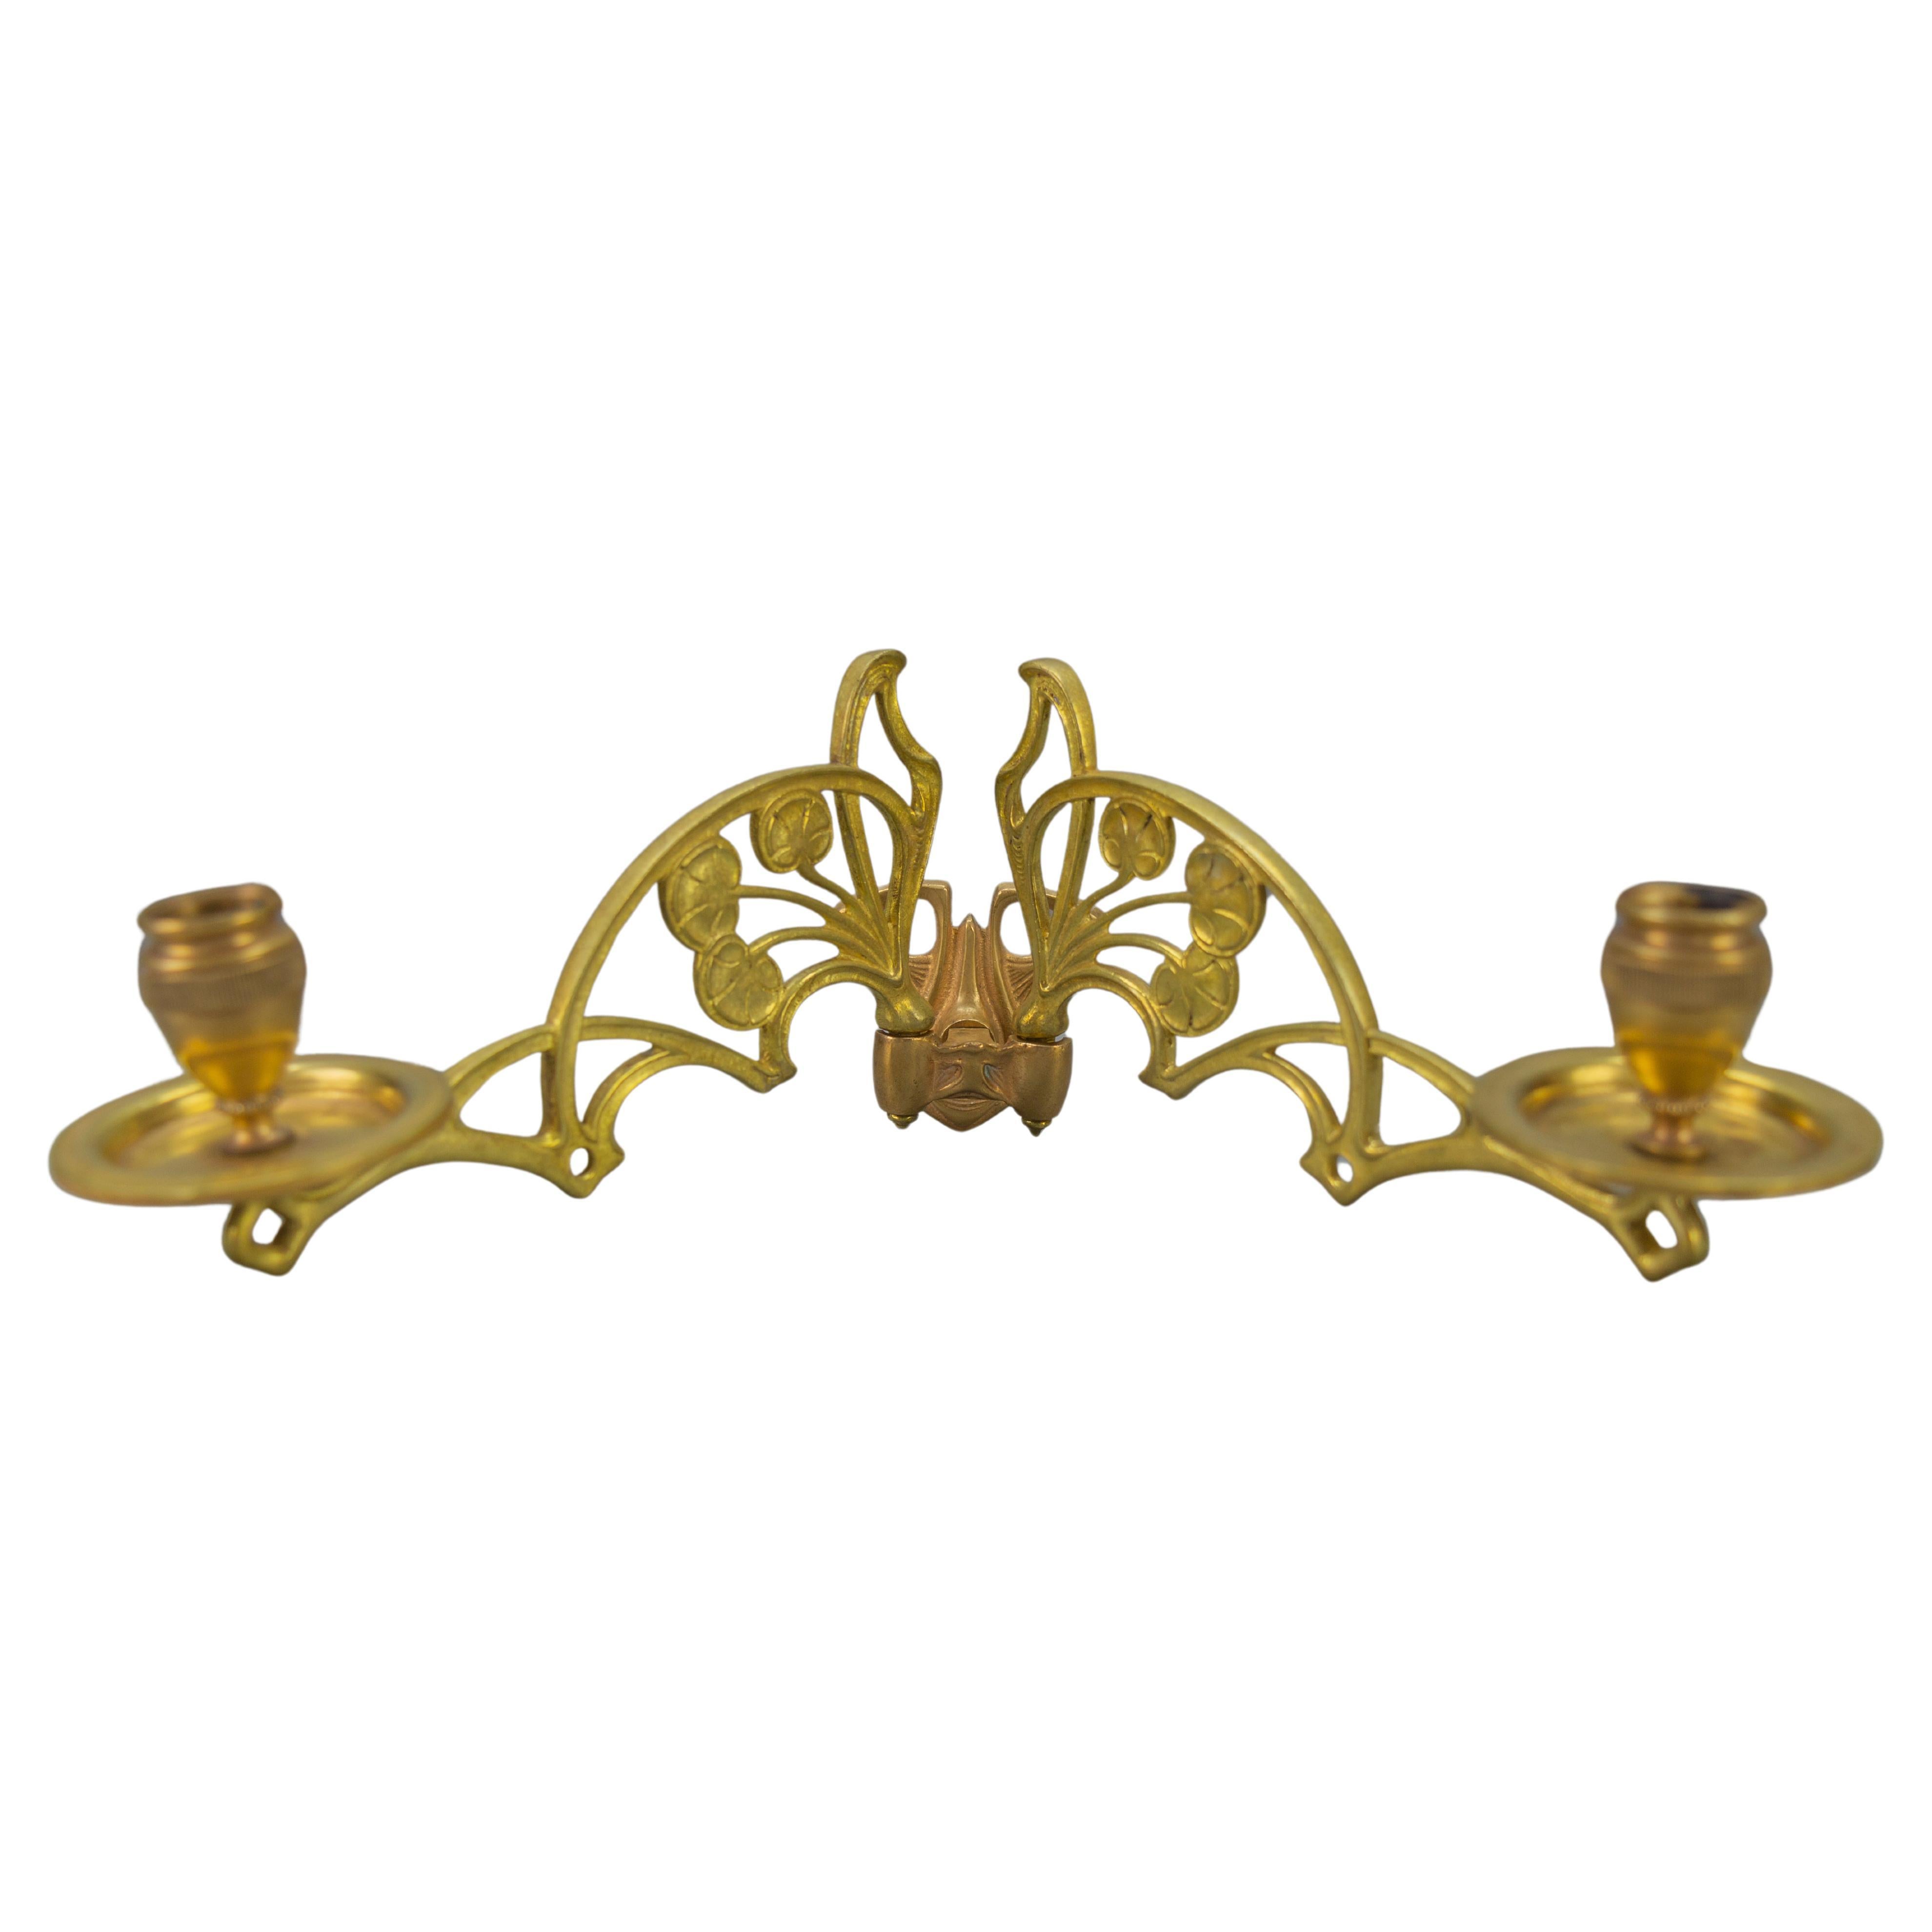 French Art Nouveau Brass and Bronze Twin Arm Piano or Wall Candle Sconce For Sale